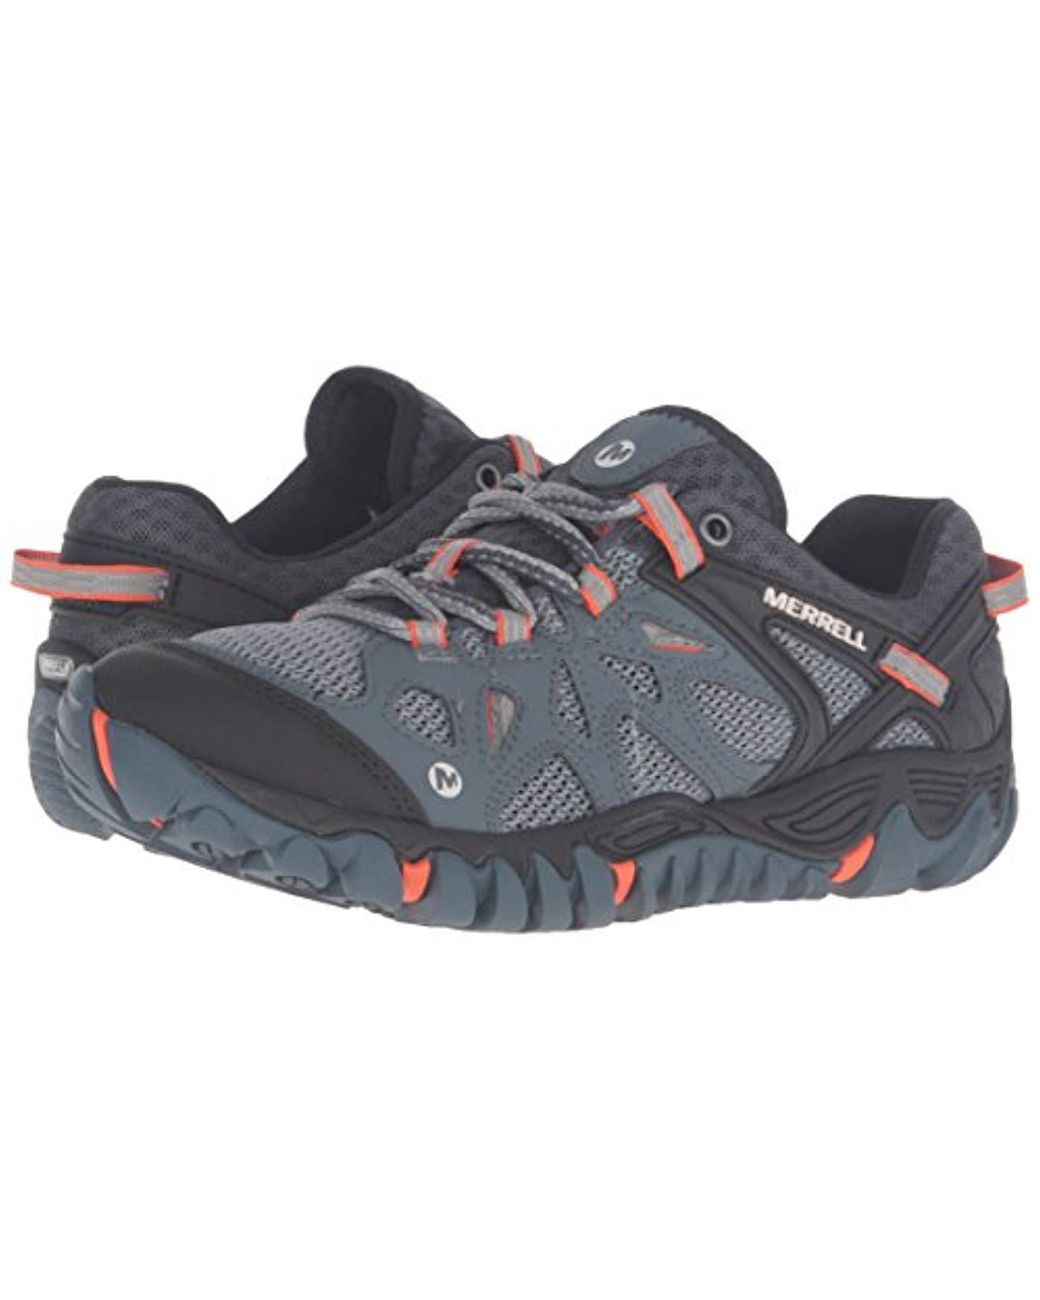 Merrell All Out Blaze Aero Sport Hiking Shoe in Gray | Lyst